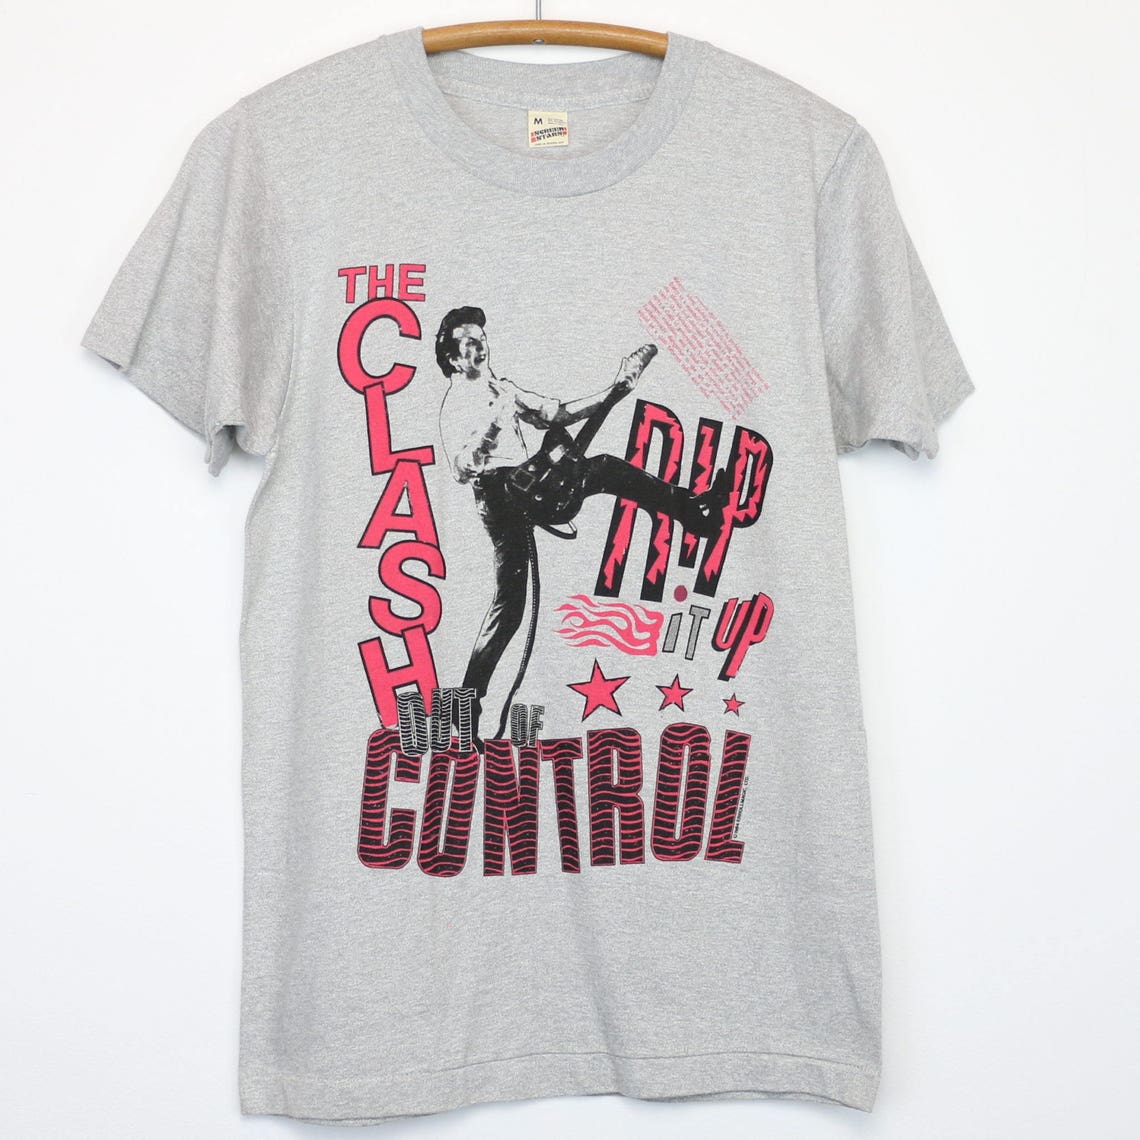 The Clash Shirt Vintage tshirt 1984 Out Of Control Tour Tee | Etsy